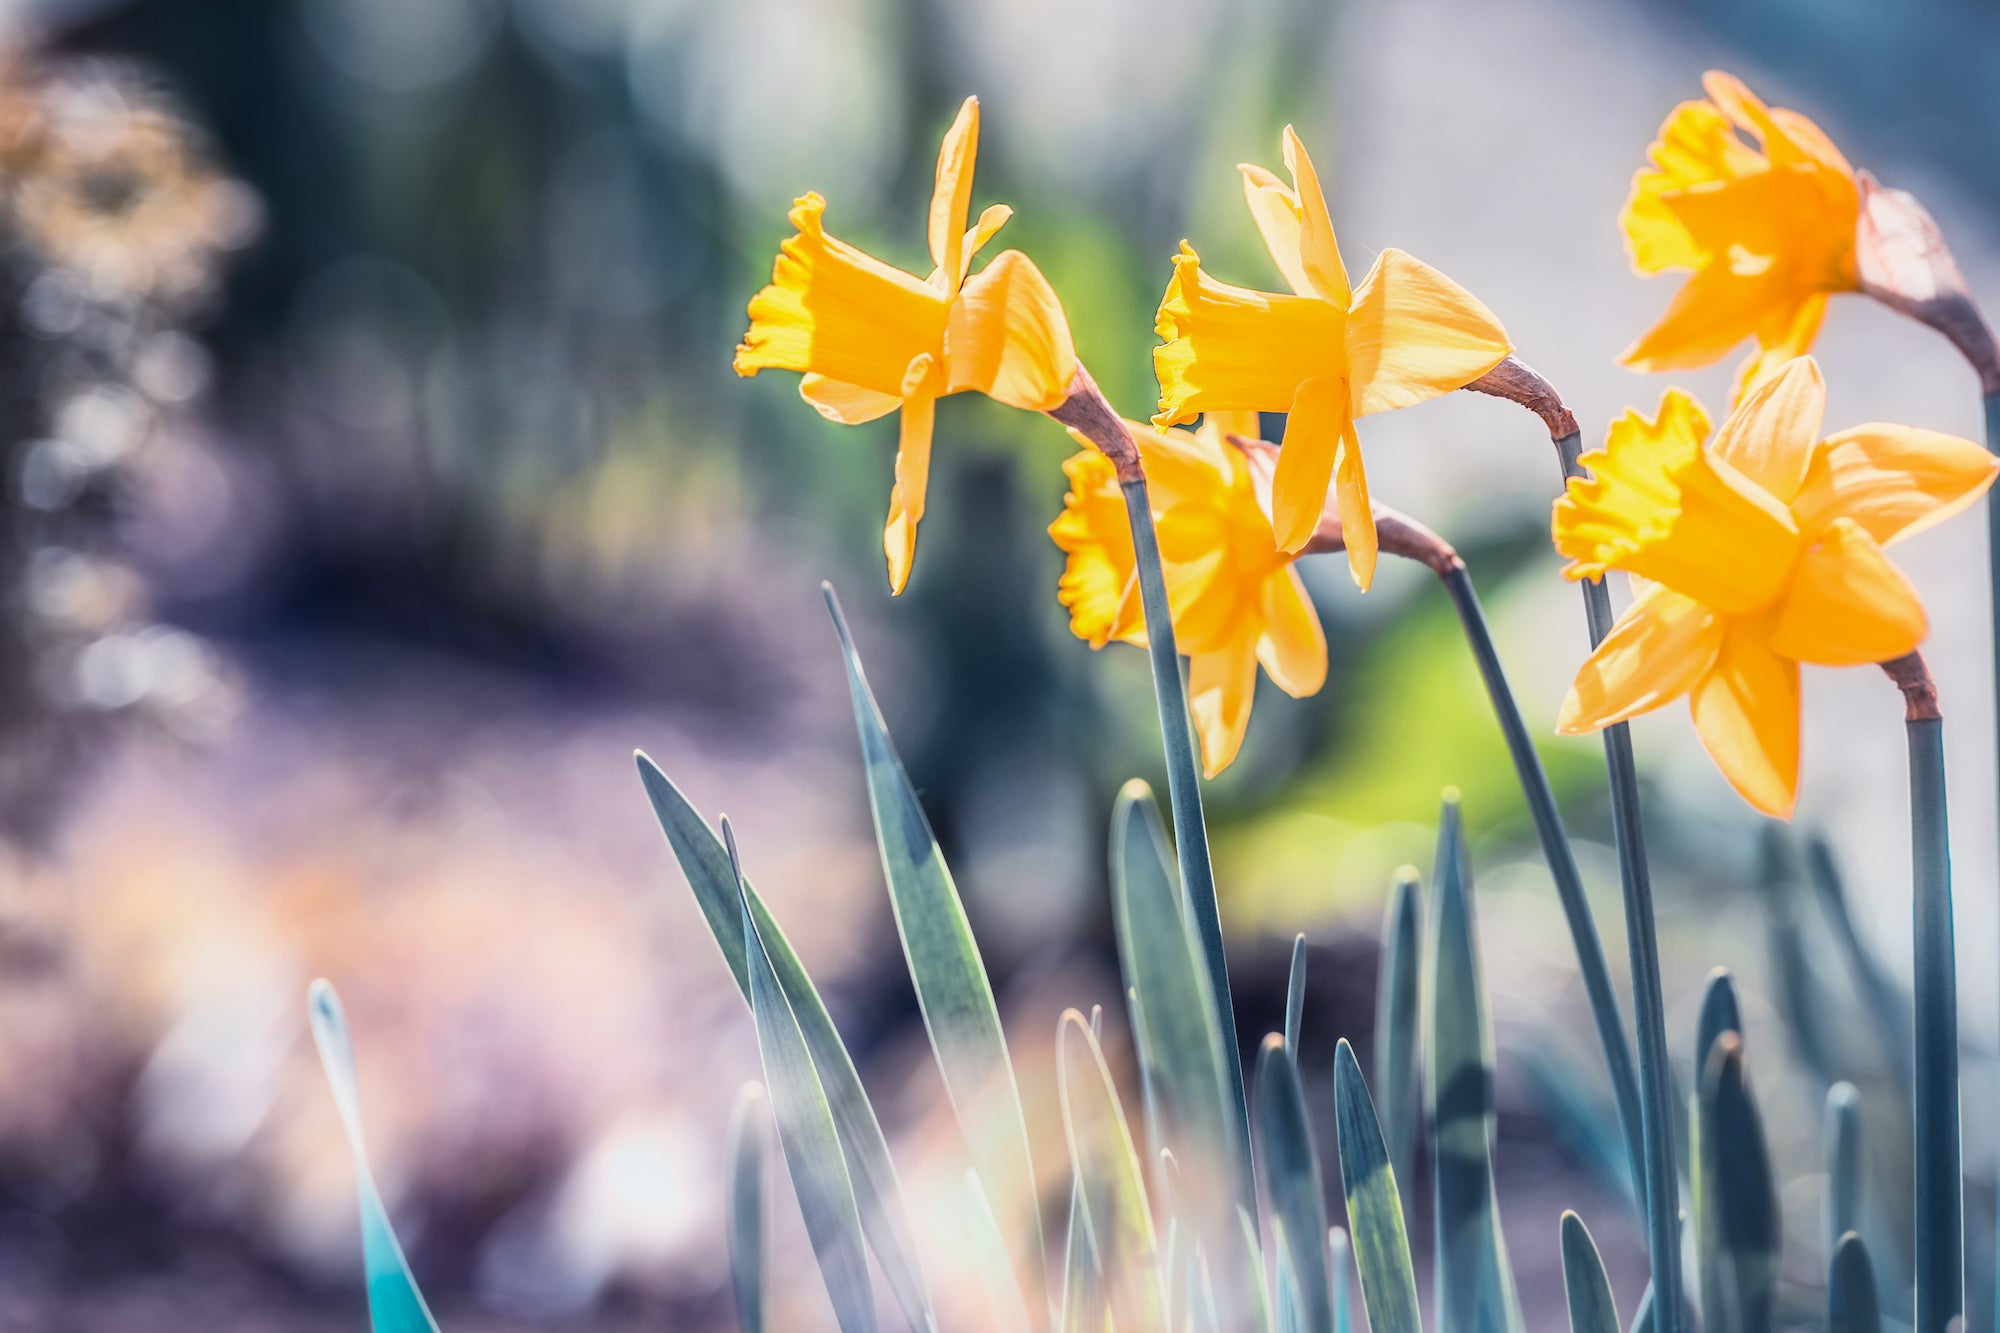 Daffodils Are Easy To Plant!